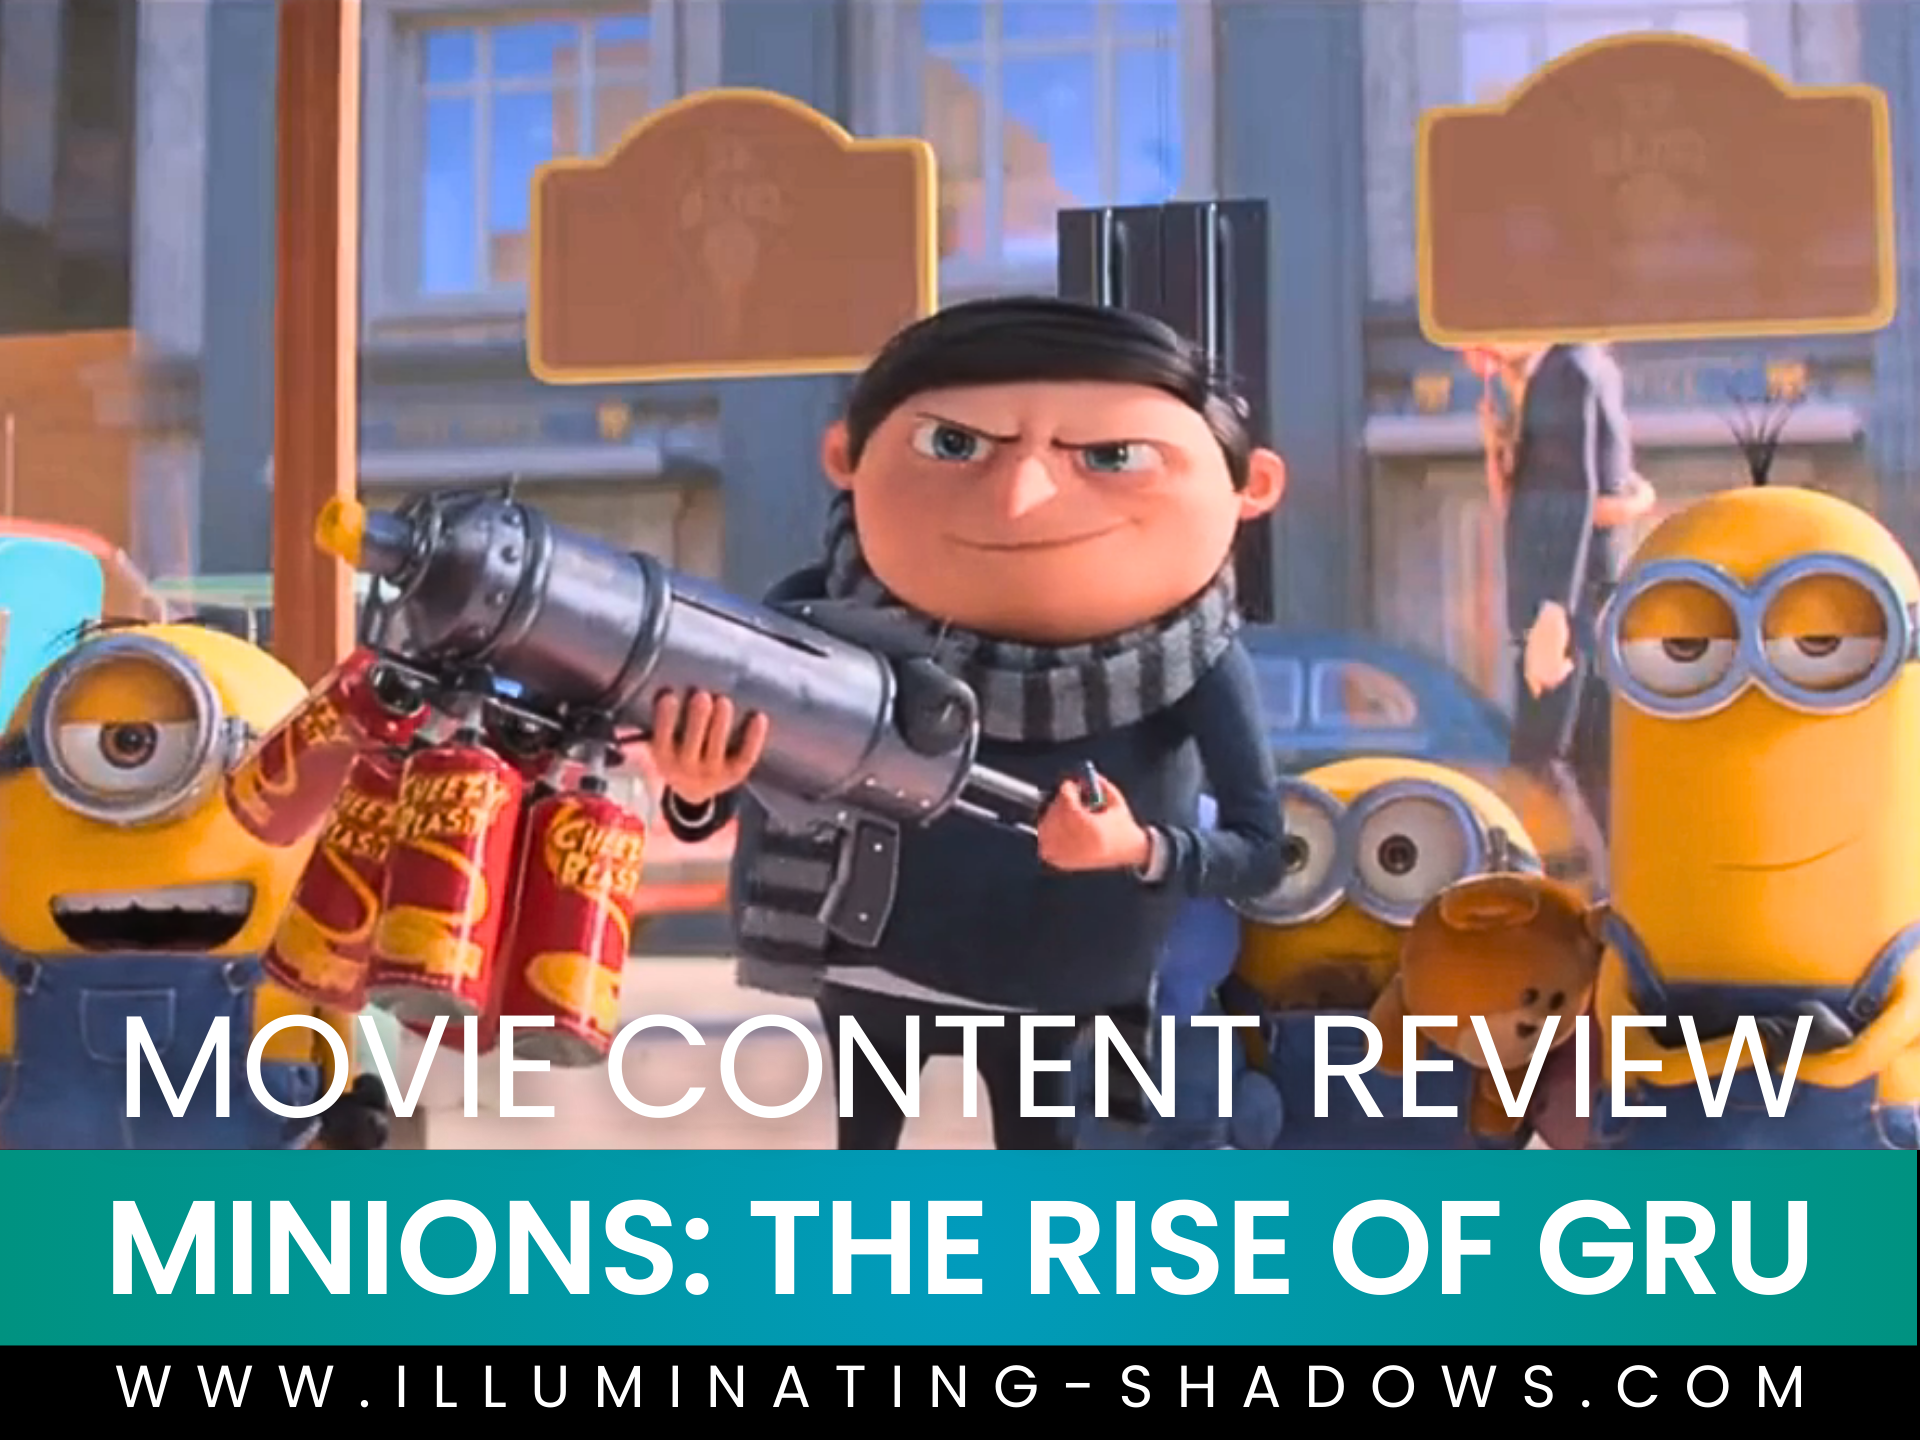 Minions: The Rise of Gru - Content Review - Picture of Gru and the Minions (Kevin, Bob, and Stuart)